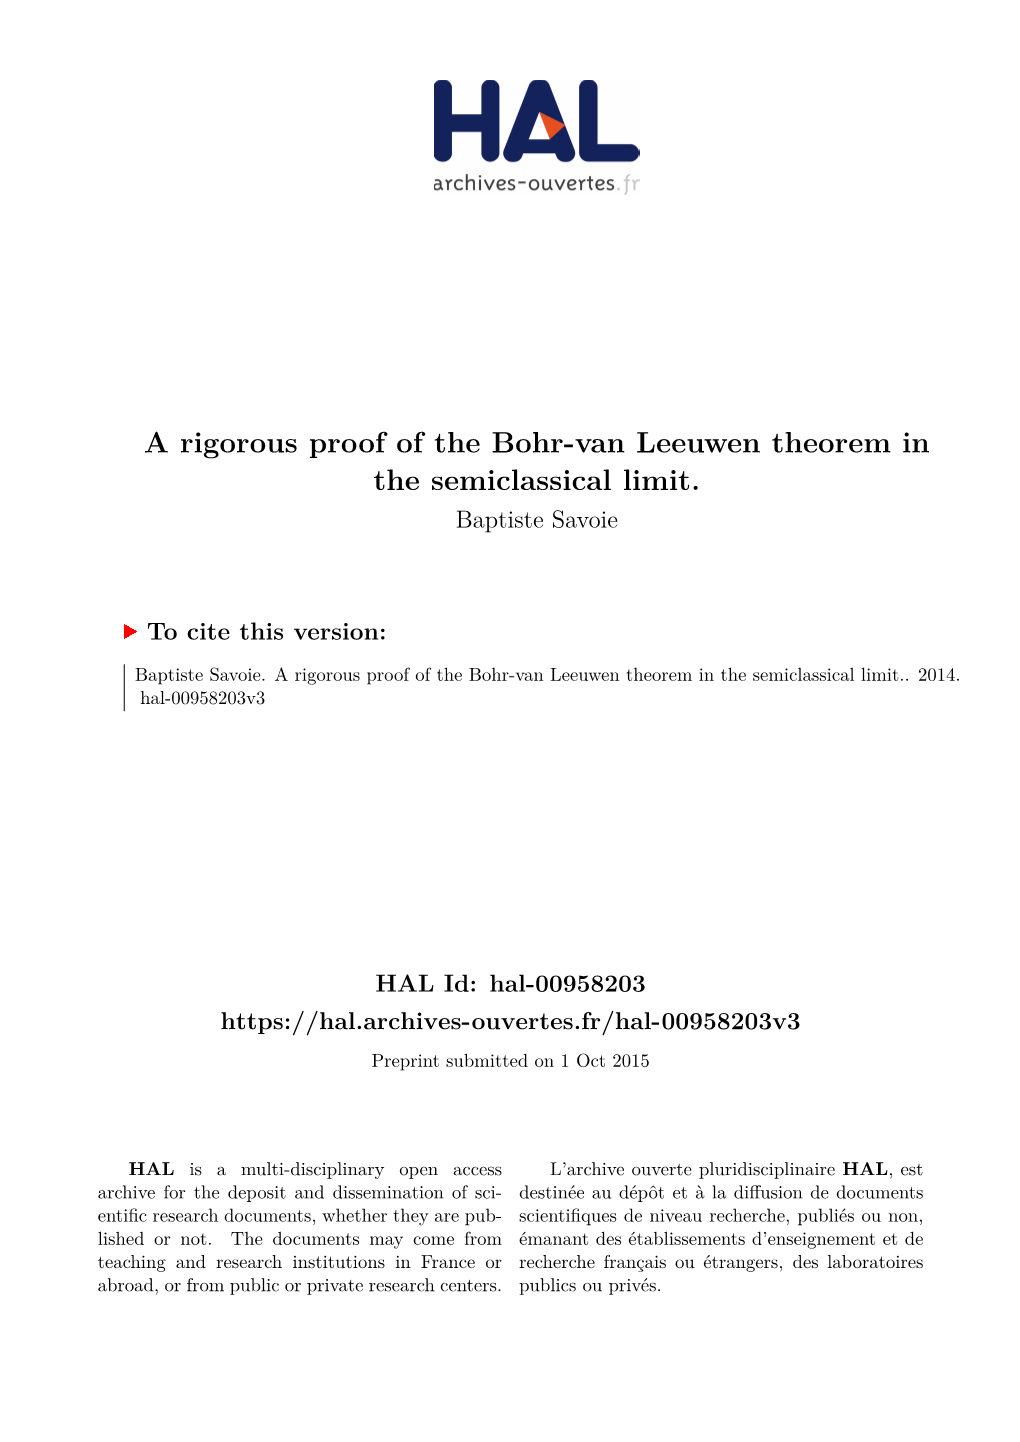 A Rigorous Proof of the Bohr-Van Leeuwen Theorem in the Semiclassical Limit